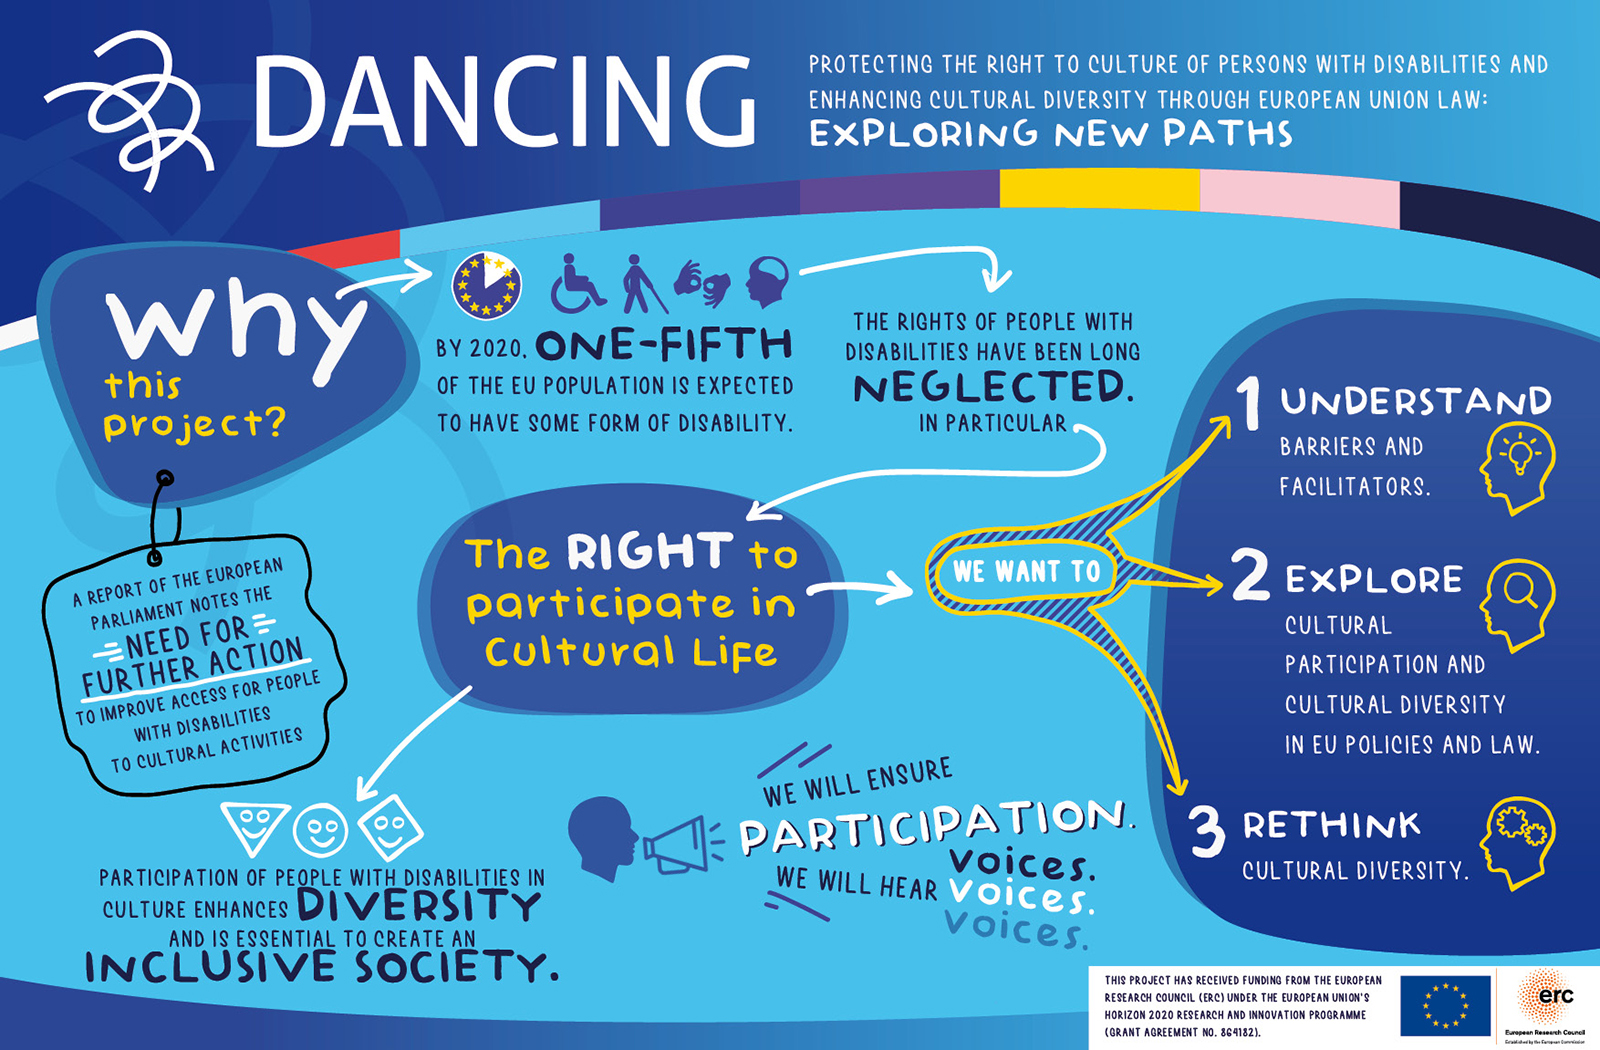 “The graphic and accessibility designer Norbert Cronenberg has prepared an infographic of the project DANCING, graciously funded by the European Research Council Consolidator grant. We used bright colours such as light blue, blue, and yellow and small graphic images to give a snapshot and show visually the rationale of the project and its main research goals. Our logo, created by Wonder Works, is included on the top of the infographic.